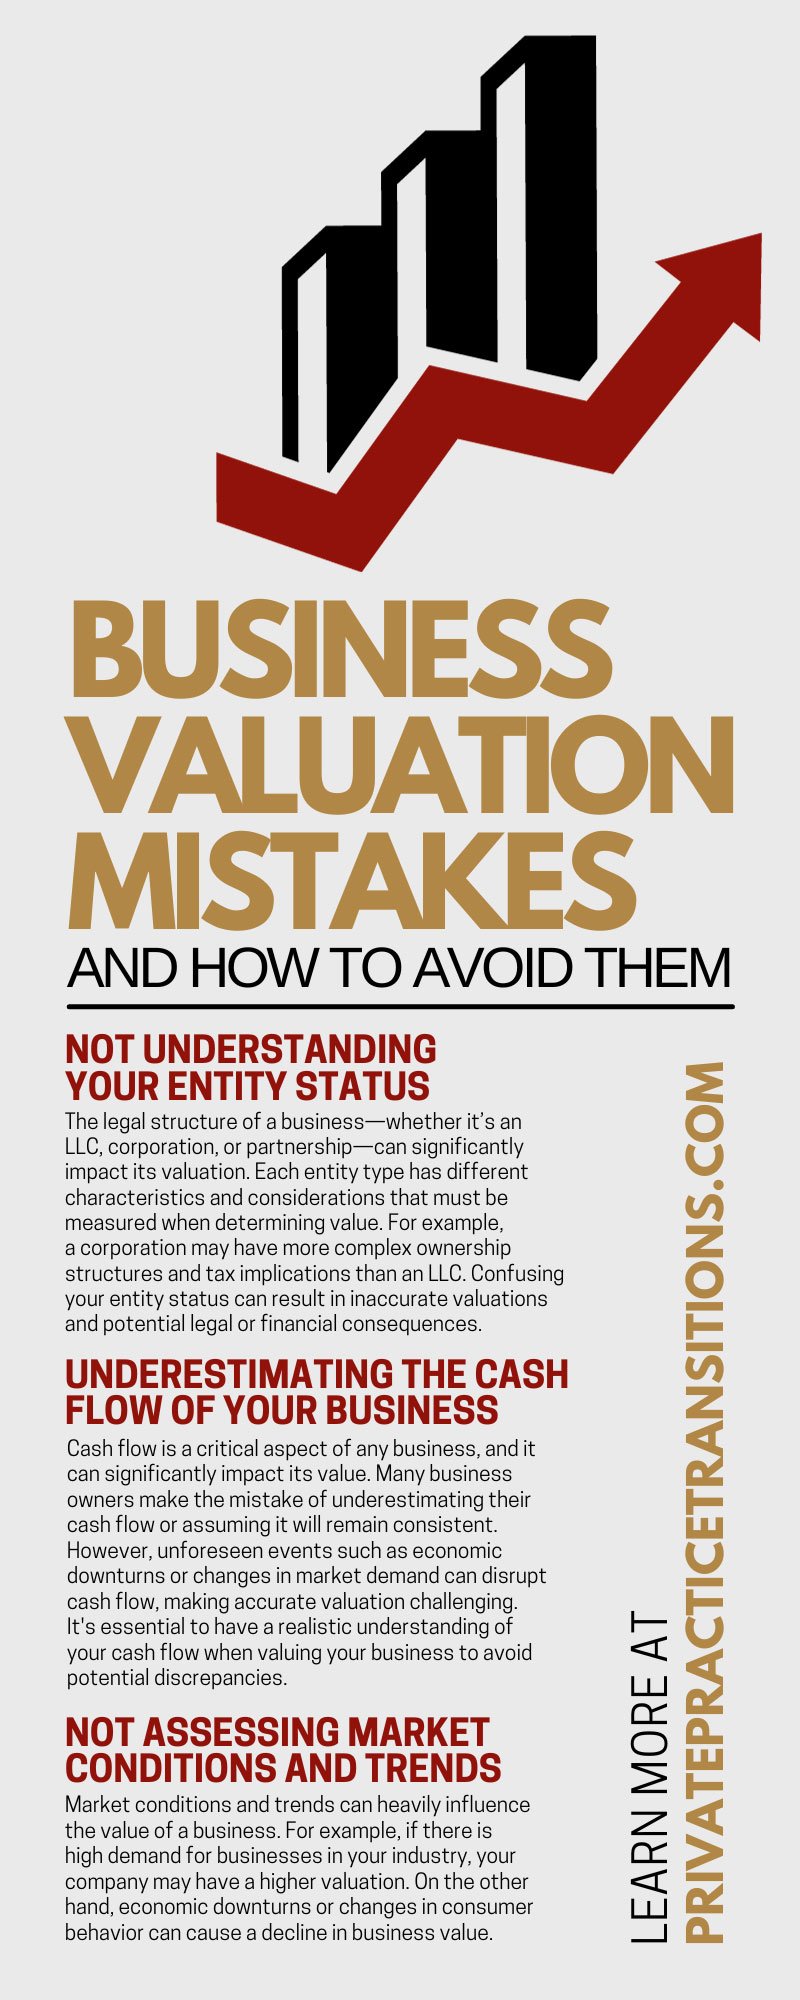 10 Business Valuation Mistakes and How To Avoid Them